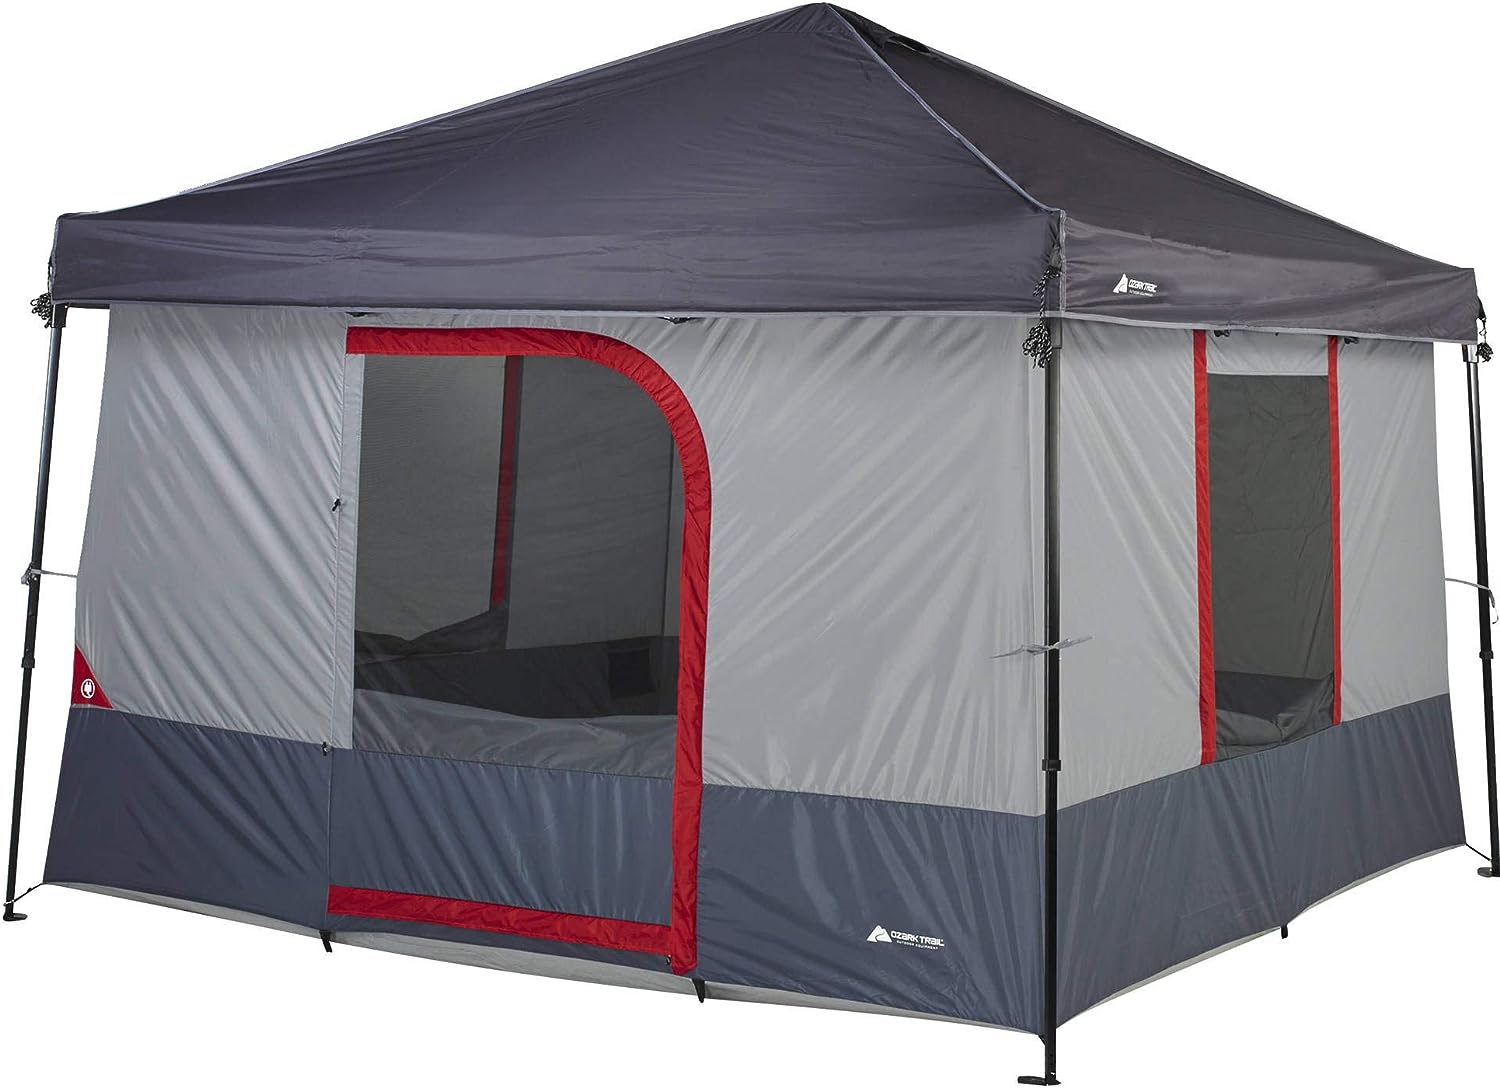 Ozark Trail Tent Review